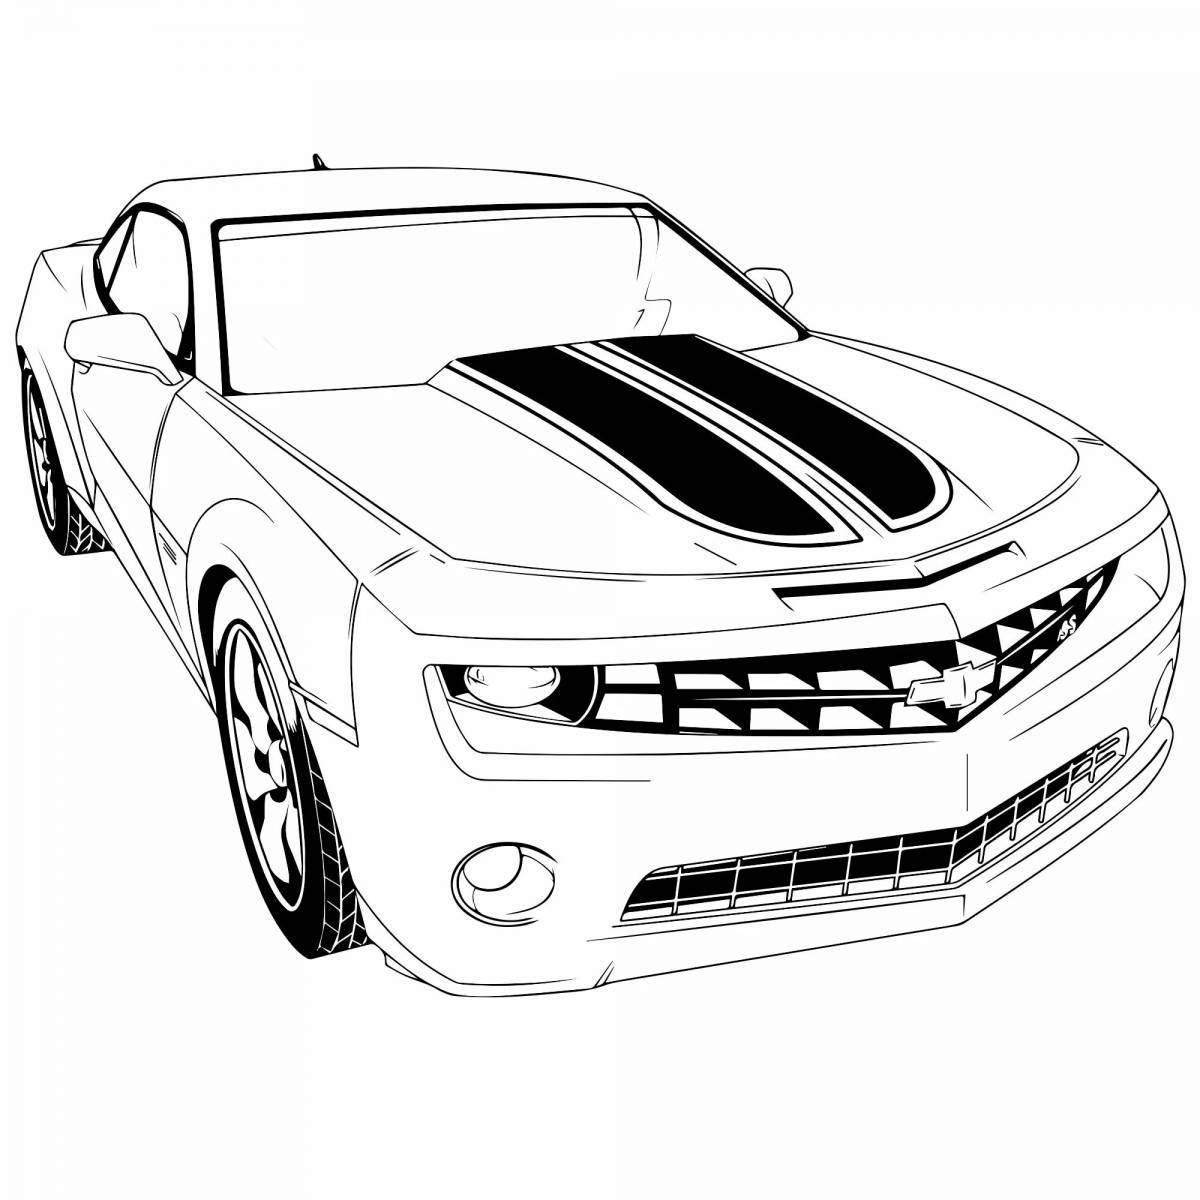 Colorific coloring page easy for boys